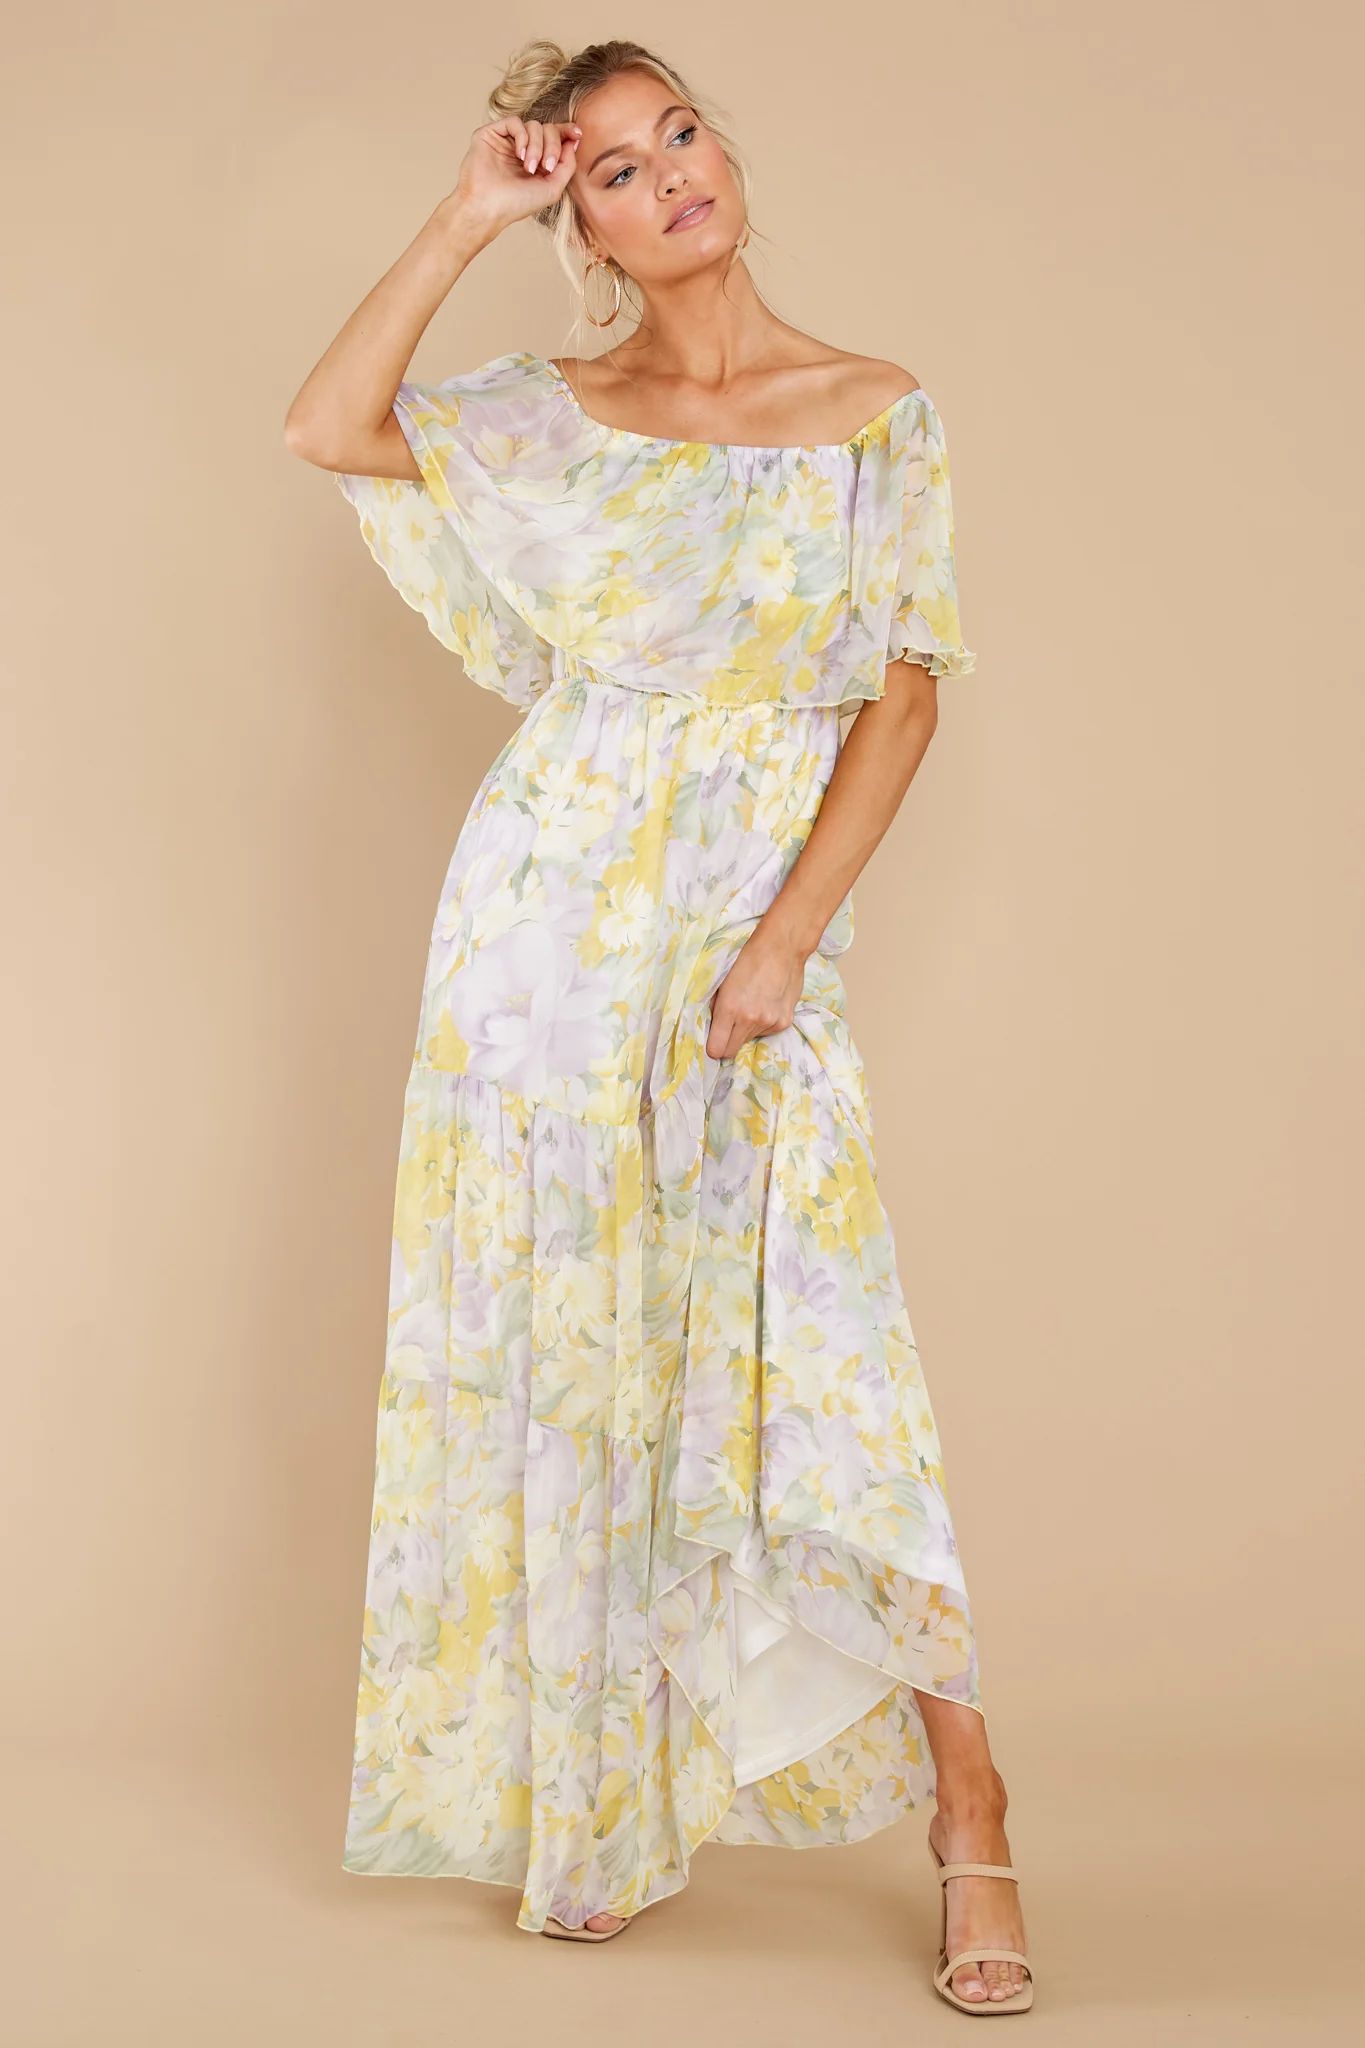 Washed Memories White And Yellow Floral Print Maxi Dress | Red Dress 